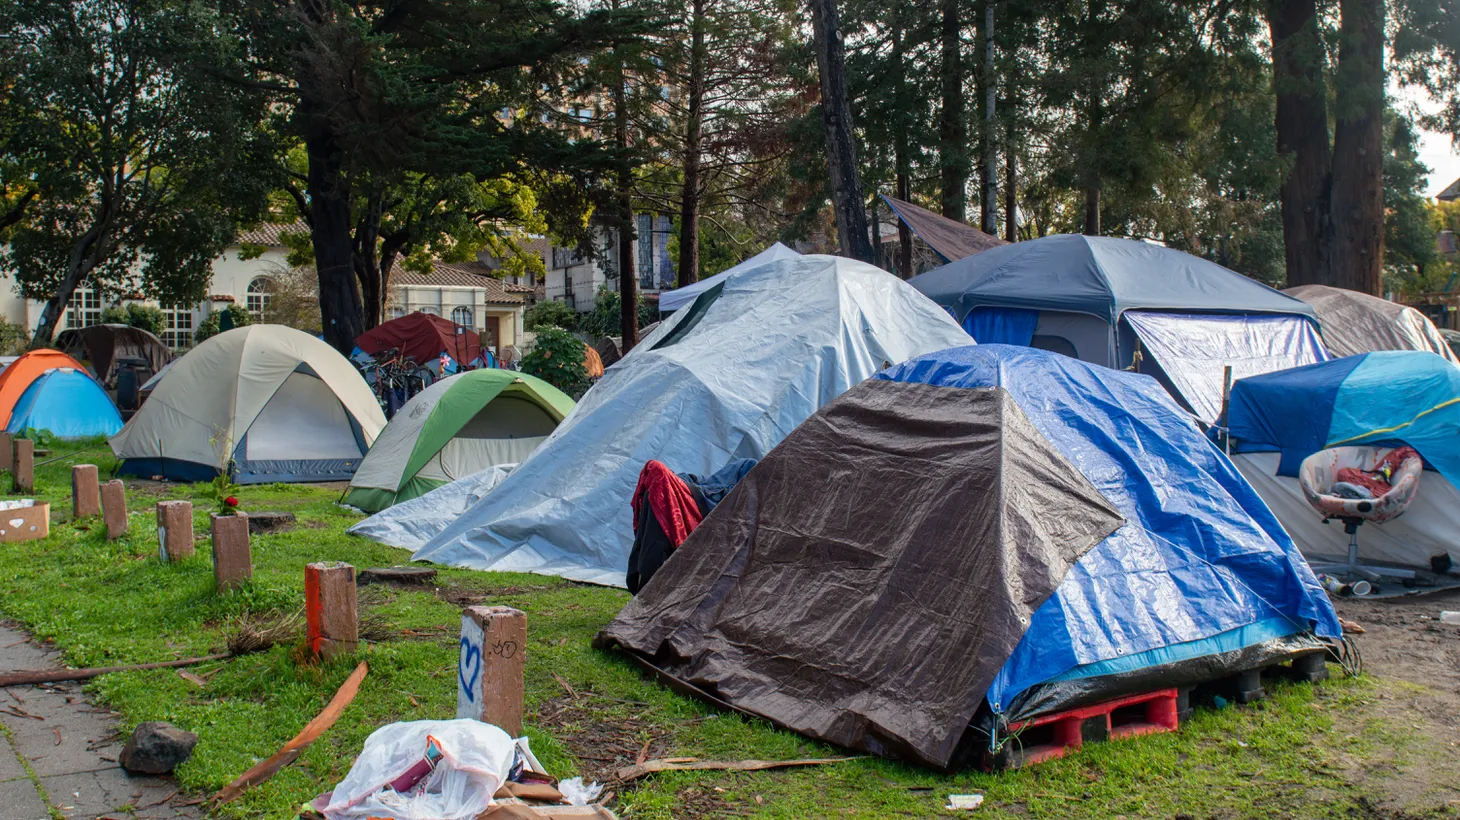 Homeless encampments sit at Peoples Park, a historic site of political activism in Berkeley, California, Dec. 27, 2021.